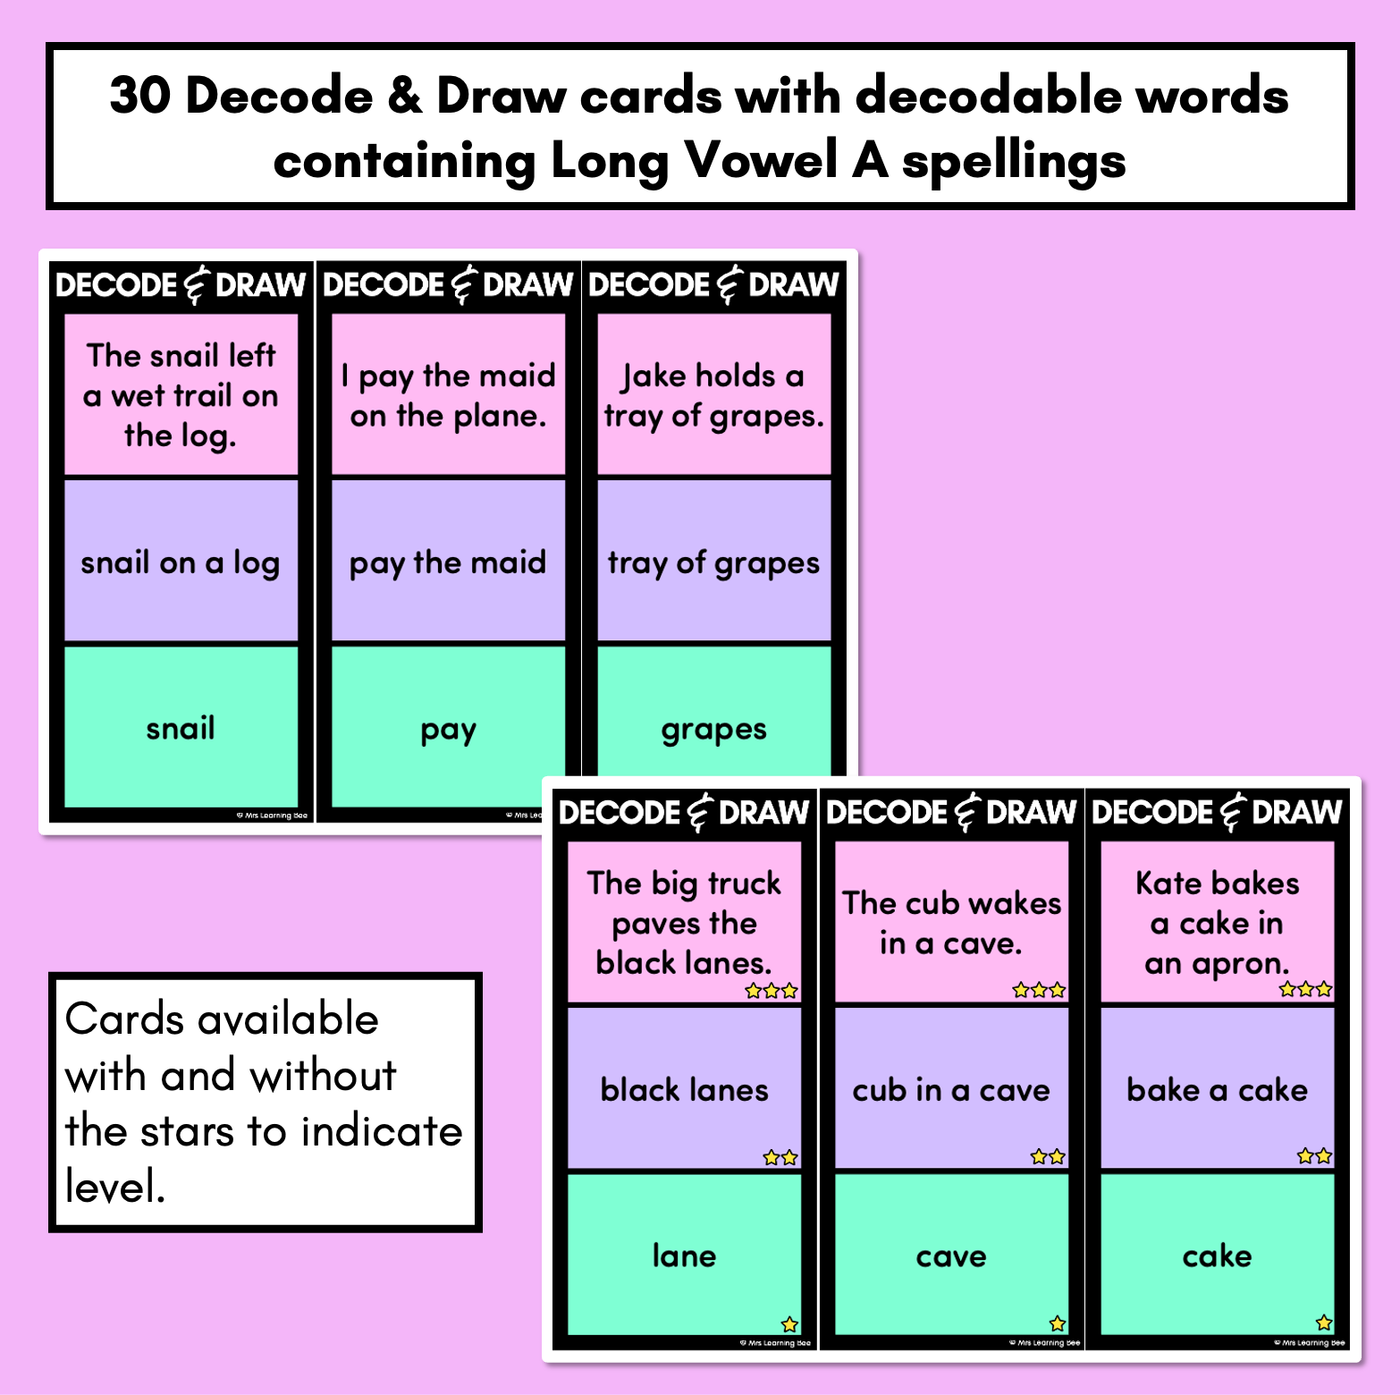 DECODE & DRAW - LONG VOWEL A - Decodable Drawing Phonics Task Cards